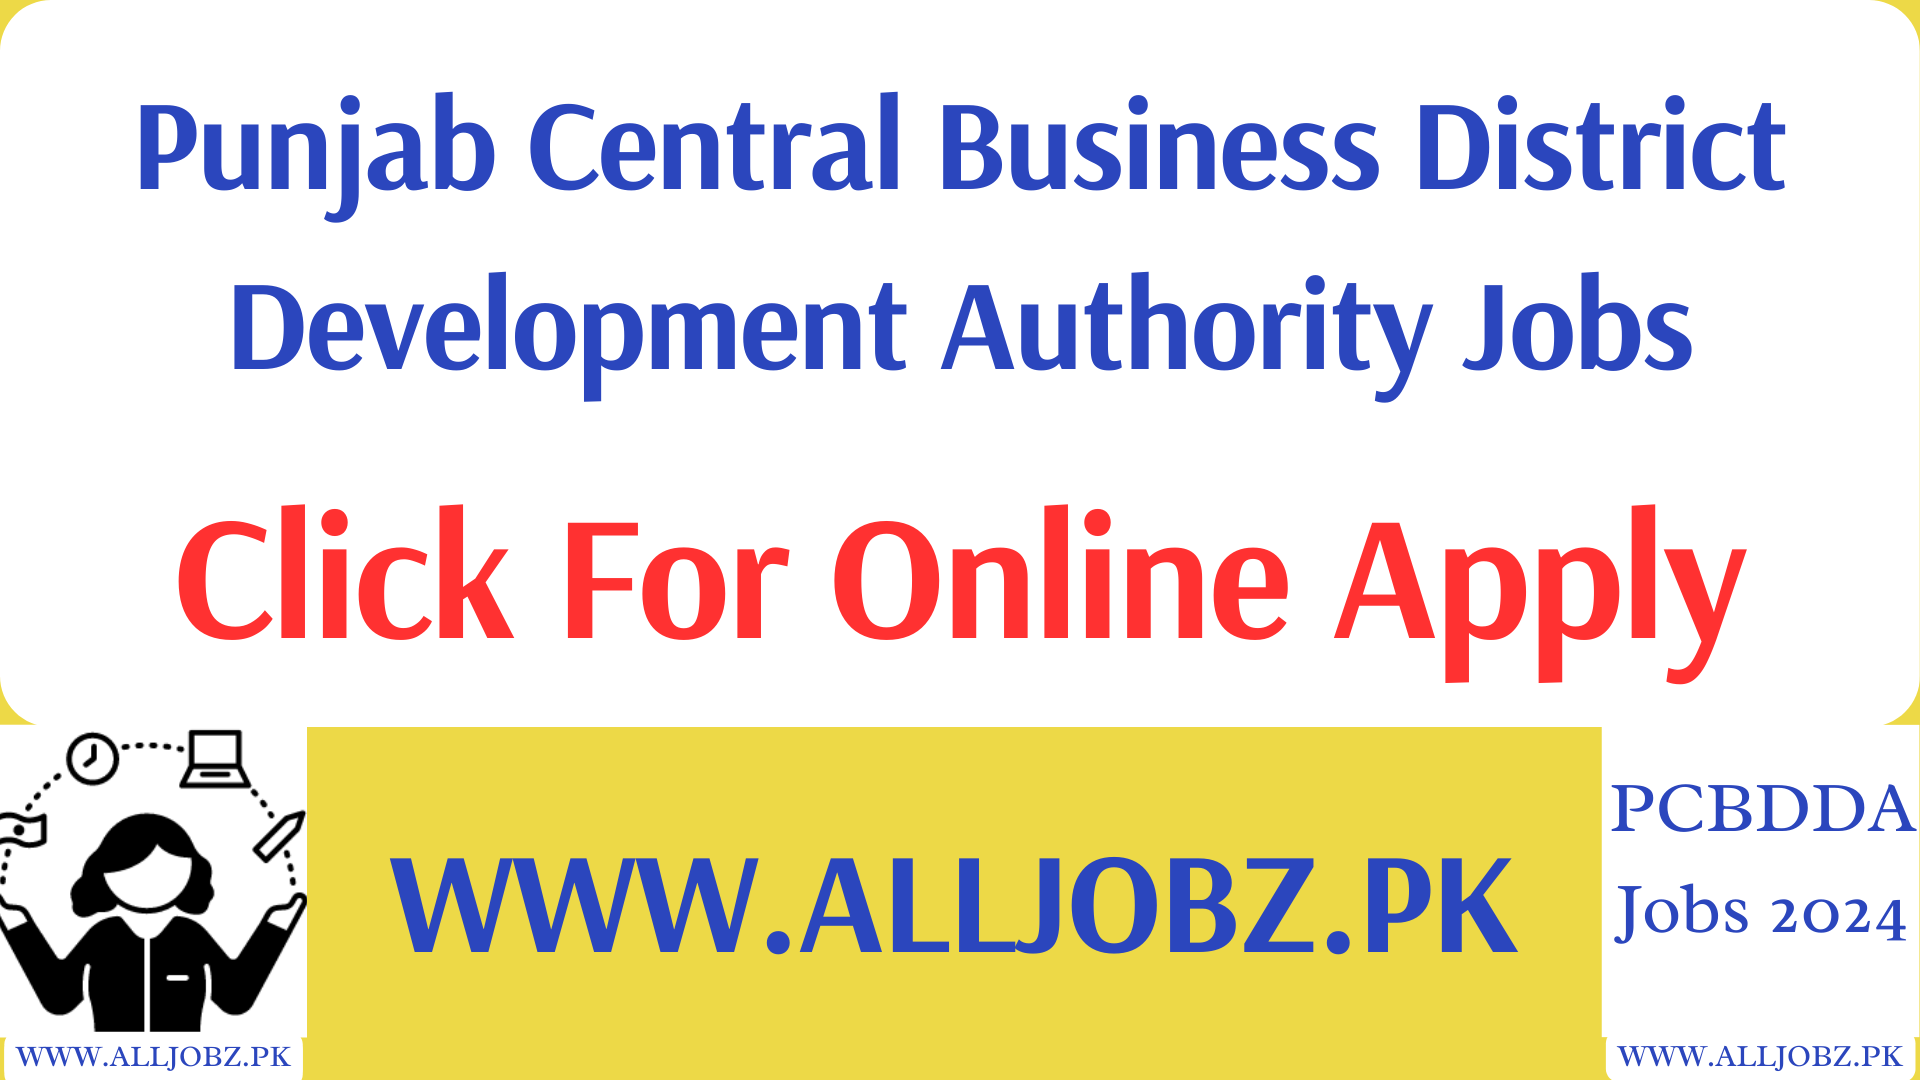 Online Career Opportunities At Punjab Central Business District Development Authority, Cbd Punjab Jobs 2024, Cbd Punjab Official Website, Cbd Punjab Careers, Central Business District Lahore, Lahore Central Business District Development Authority Act, Central Business District Lahore Master Plan, Cbd Punjab Ceo,